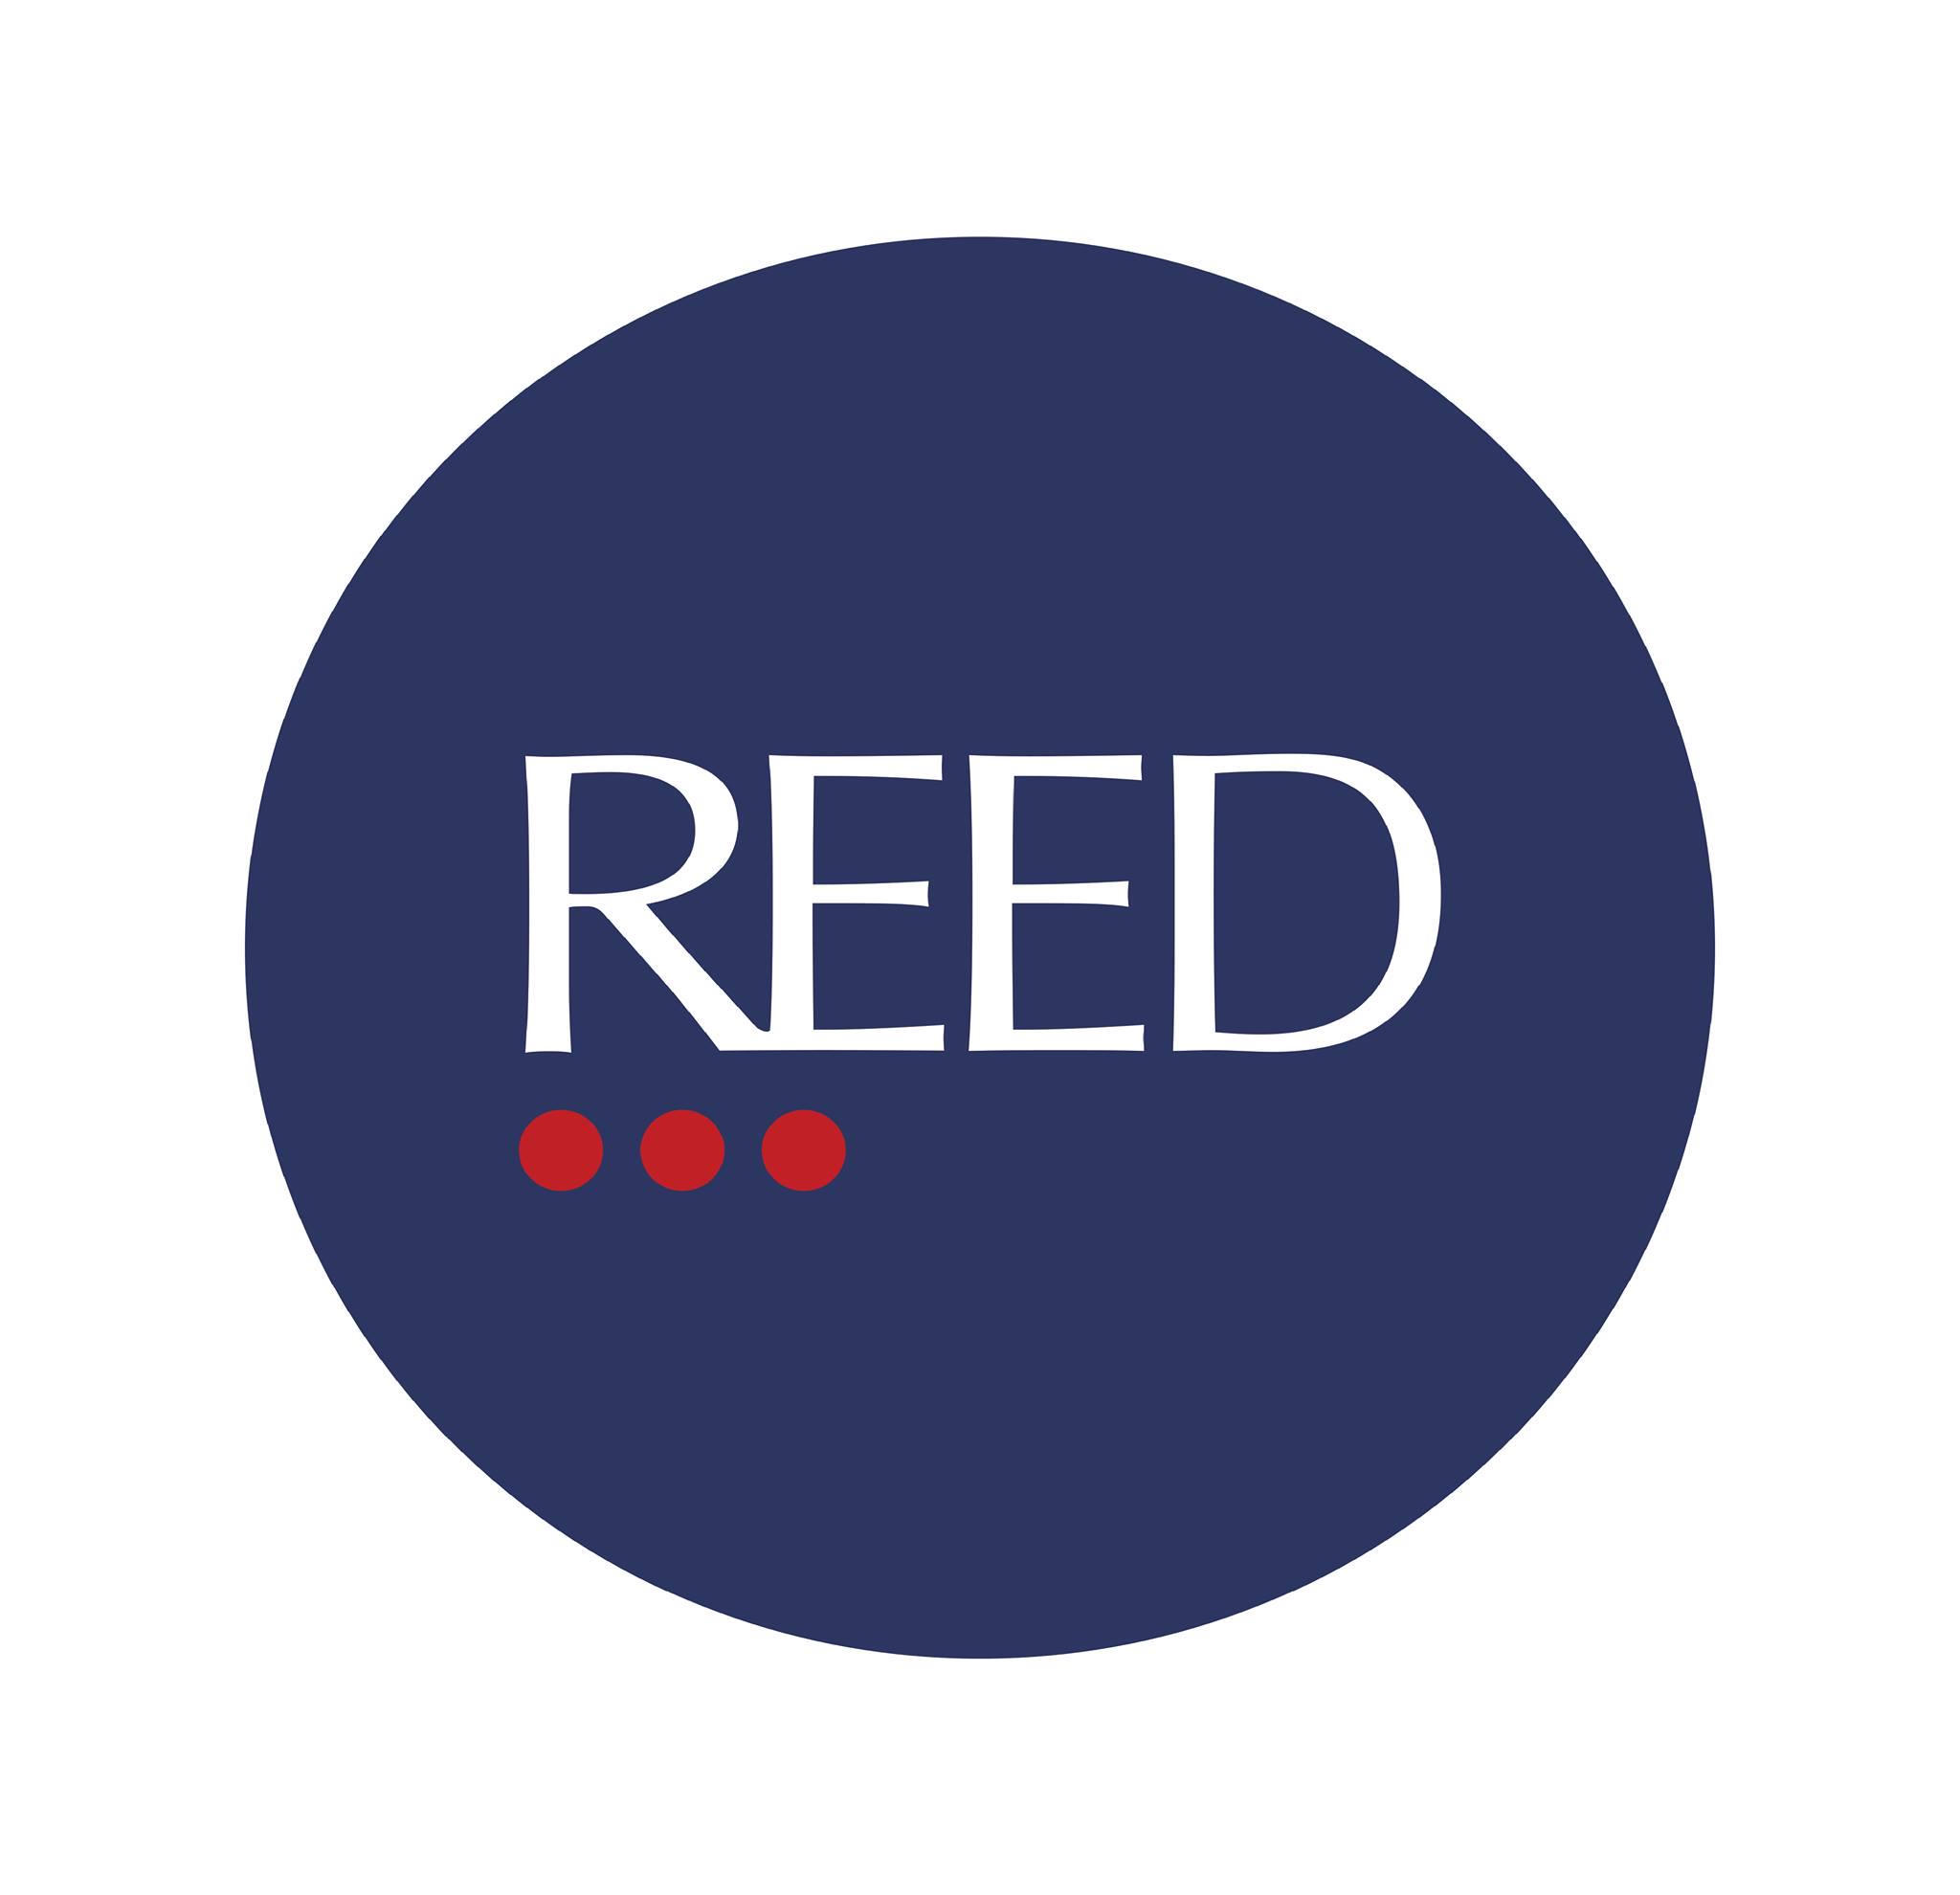 Reed Specialist Recruitment Malta Ltd. profile on Qualified.One